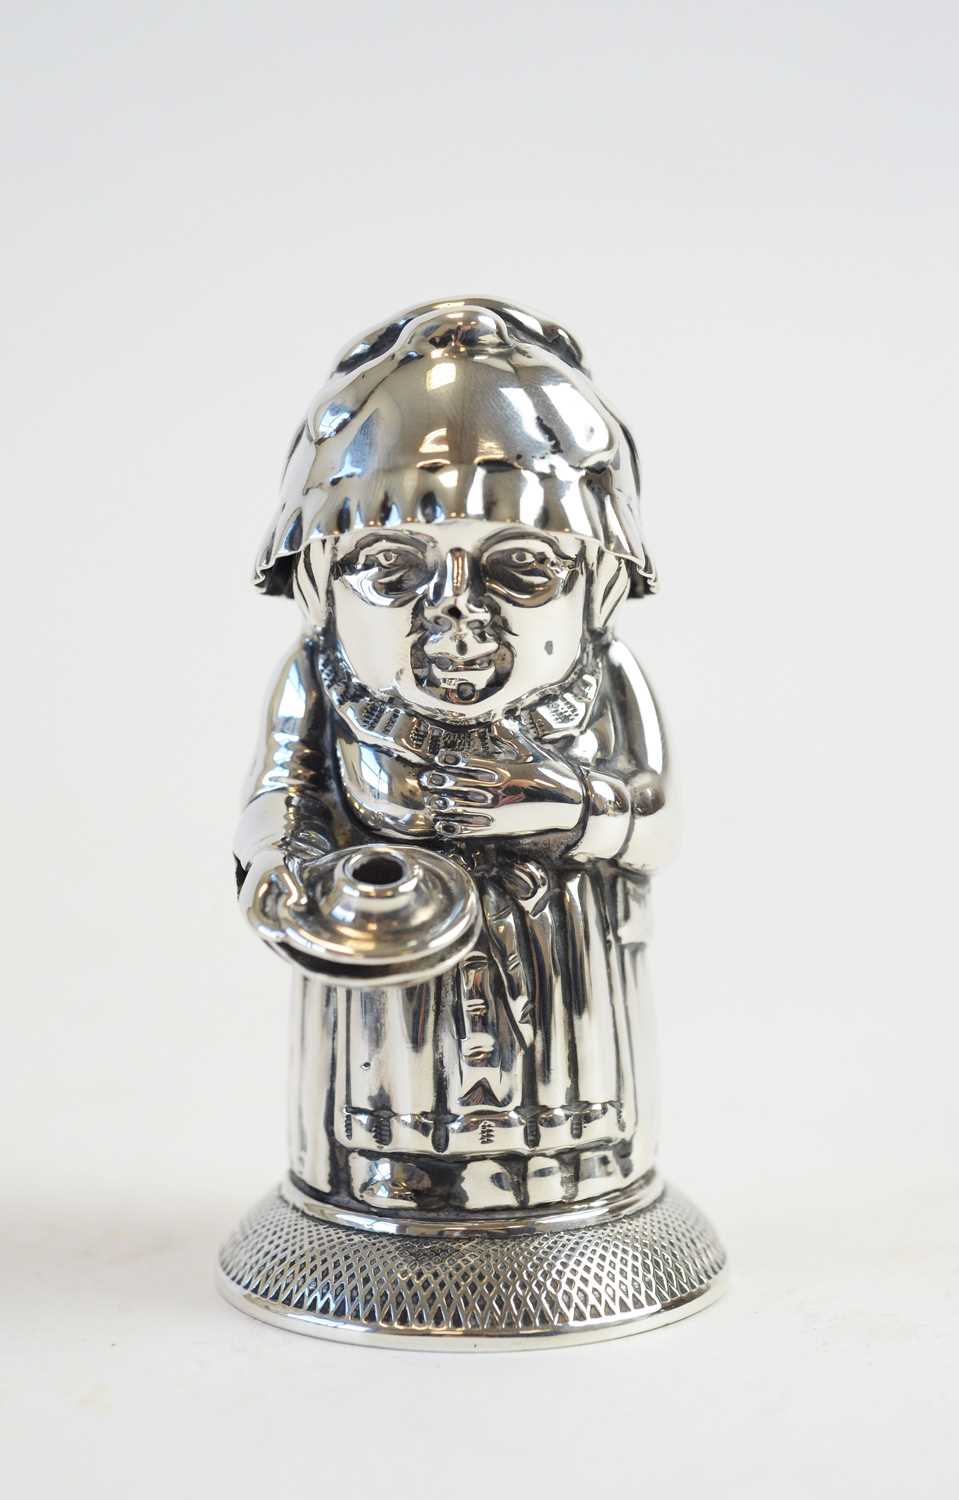 Lot 192 - Victorian silver match stand, by Deakin & Francis